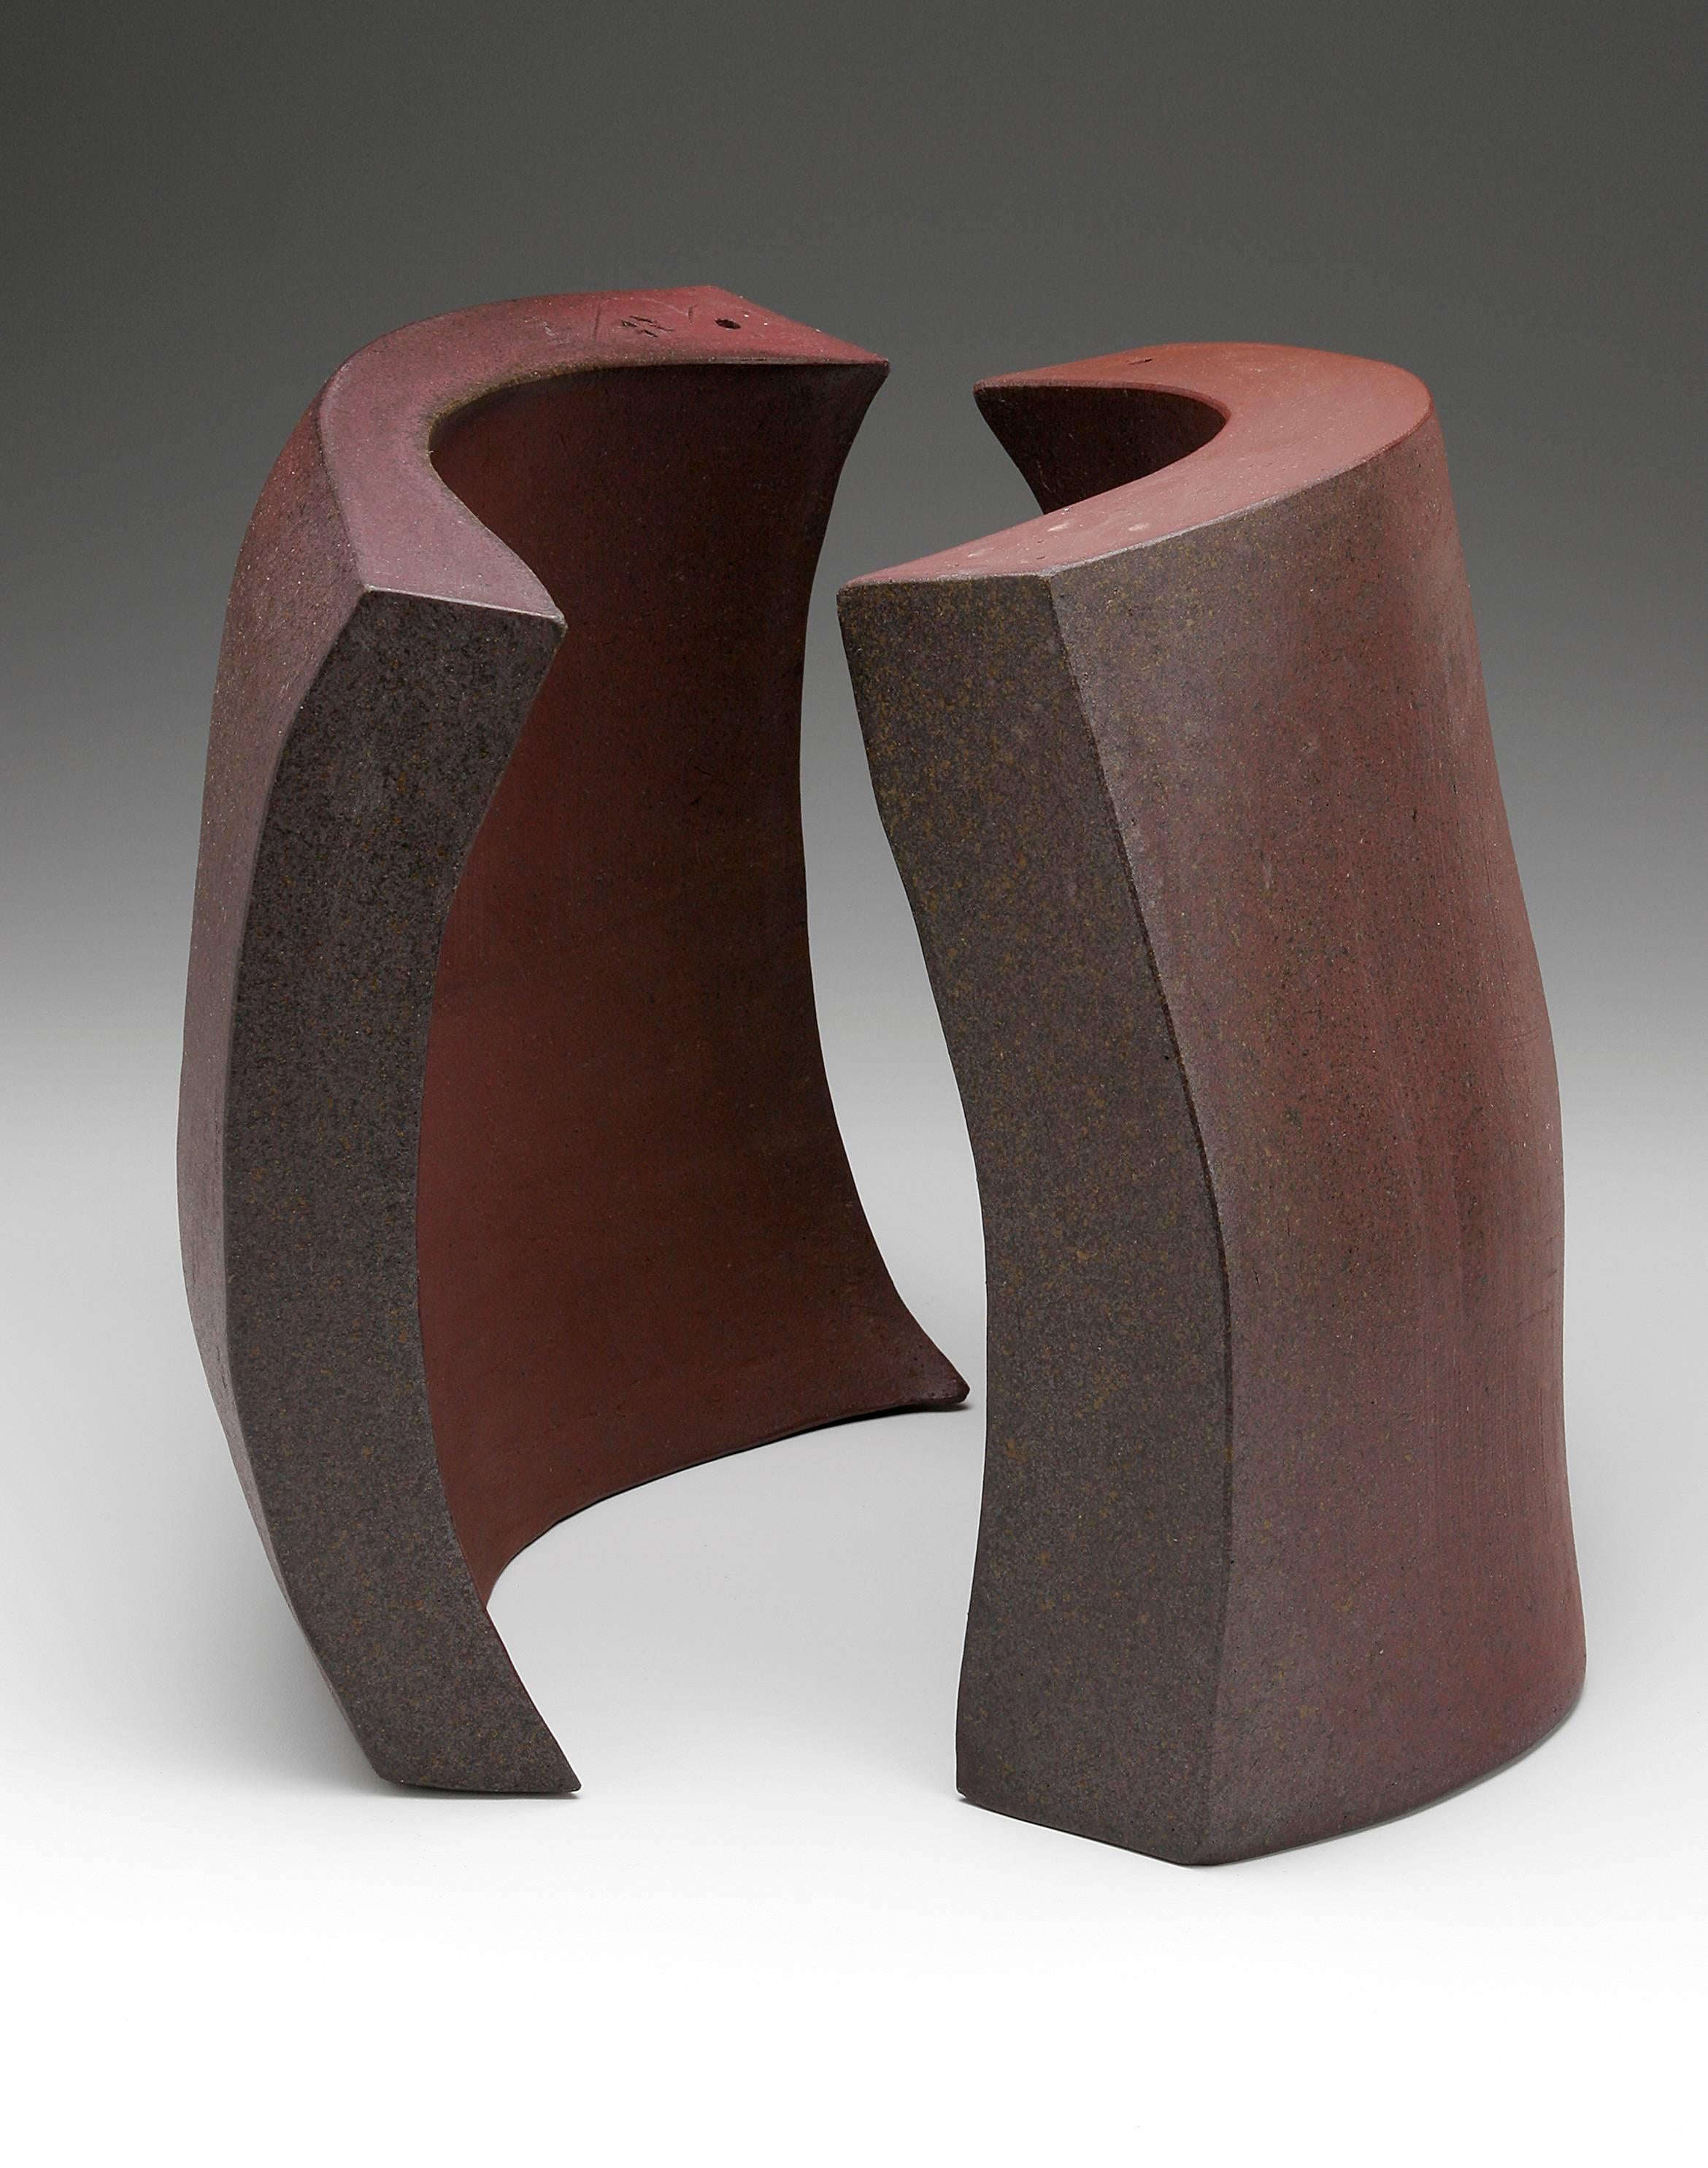 Malcolm Wright trained in Japan under the tutelage of one of Japan’s living masters in the ceramic arts, Malcolm has taken the discipline of the craft of working with clay, and fused it with an insistence on surprise, serendipity, and unknowingness.